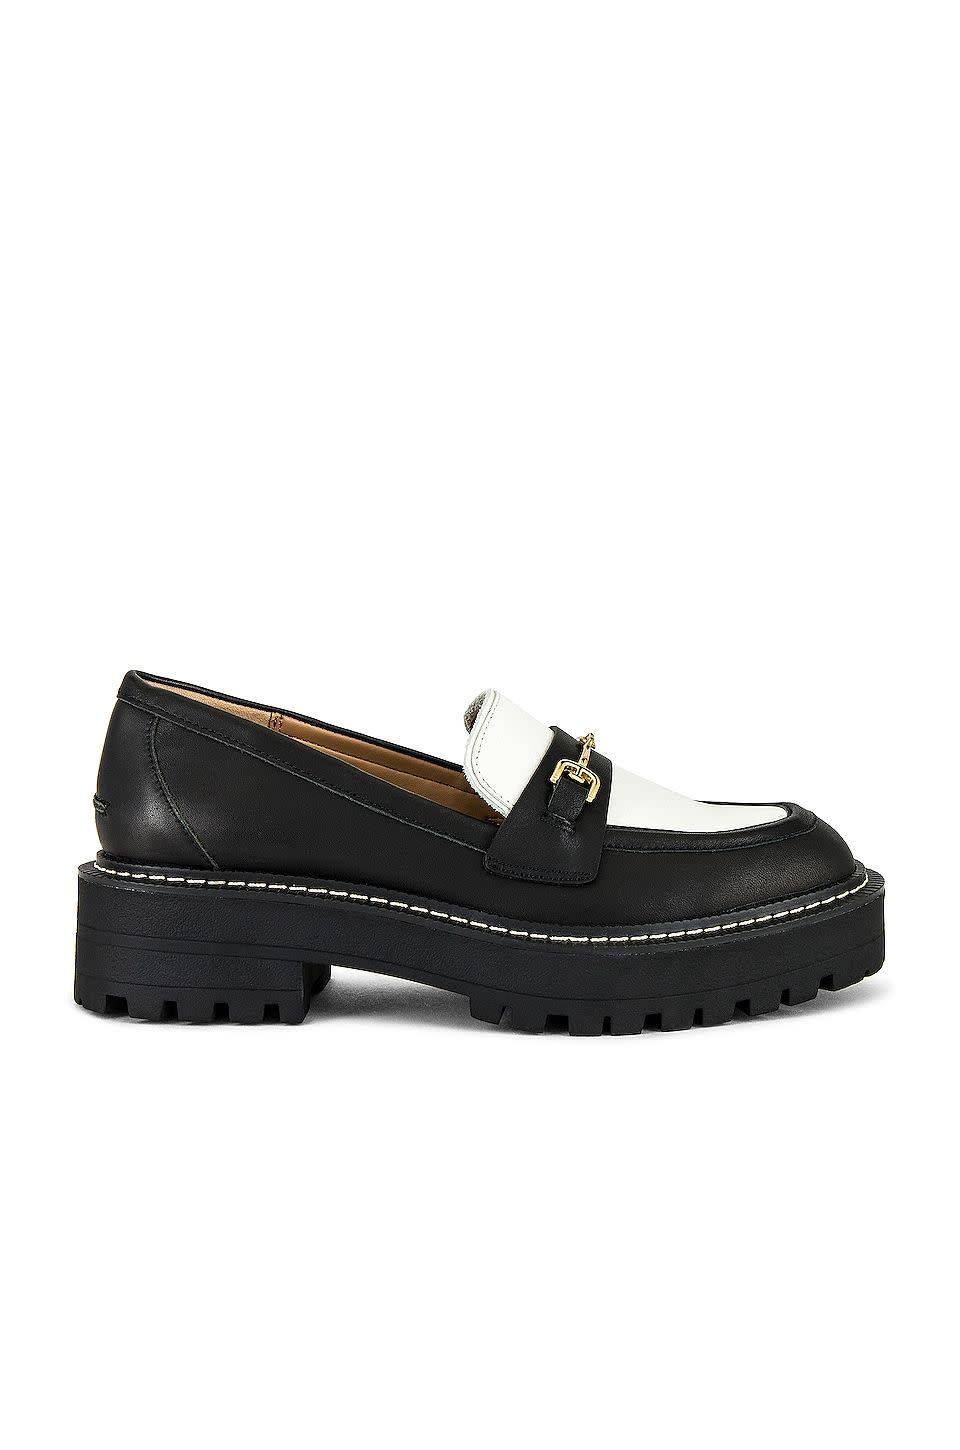 14) Laurs Loafer